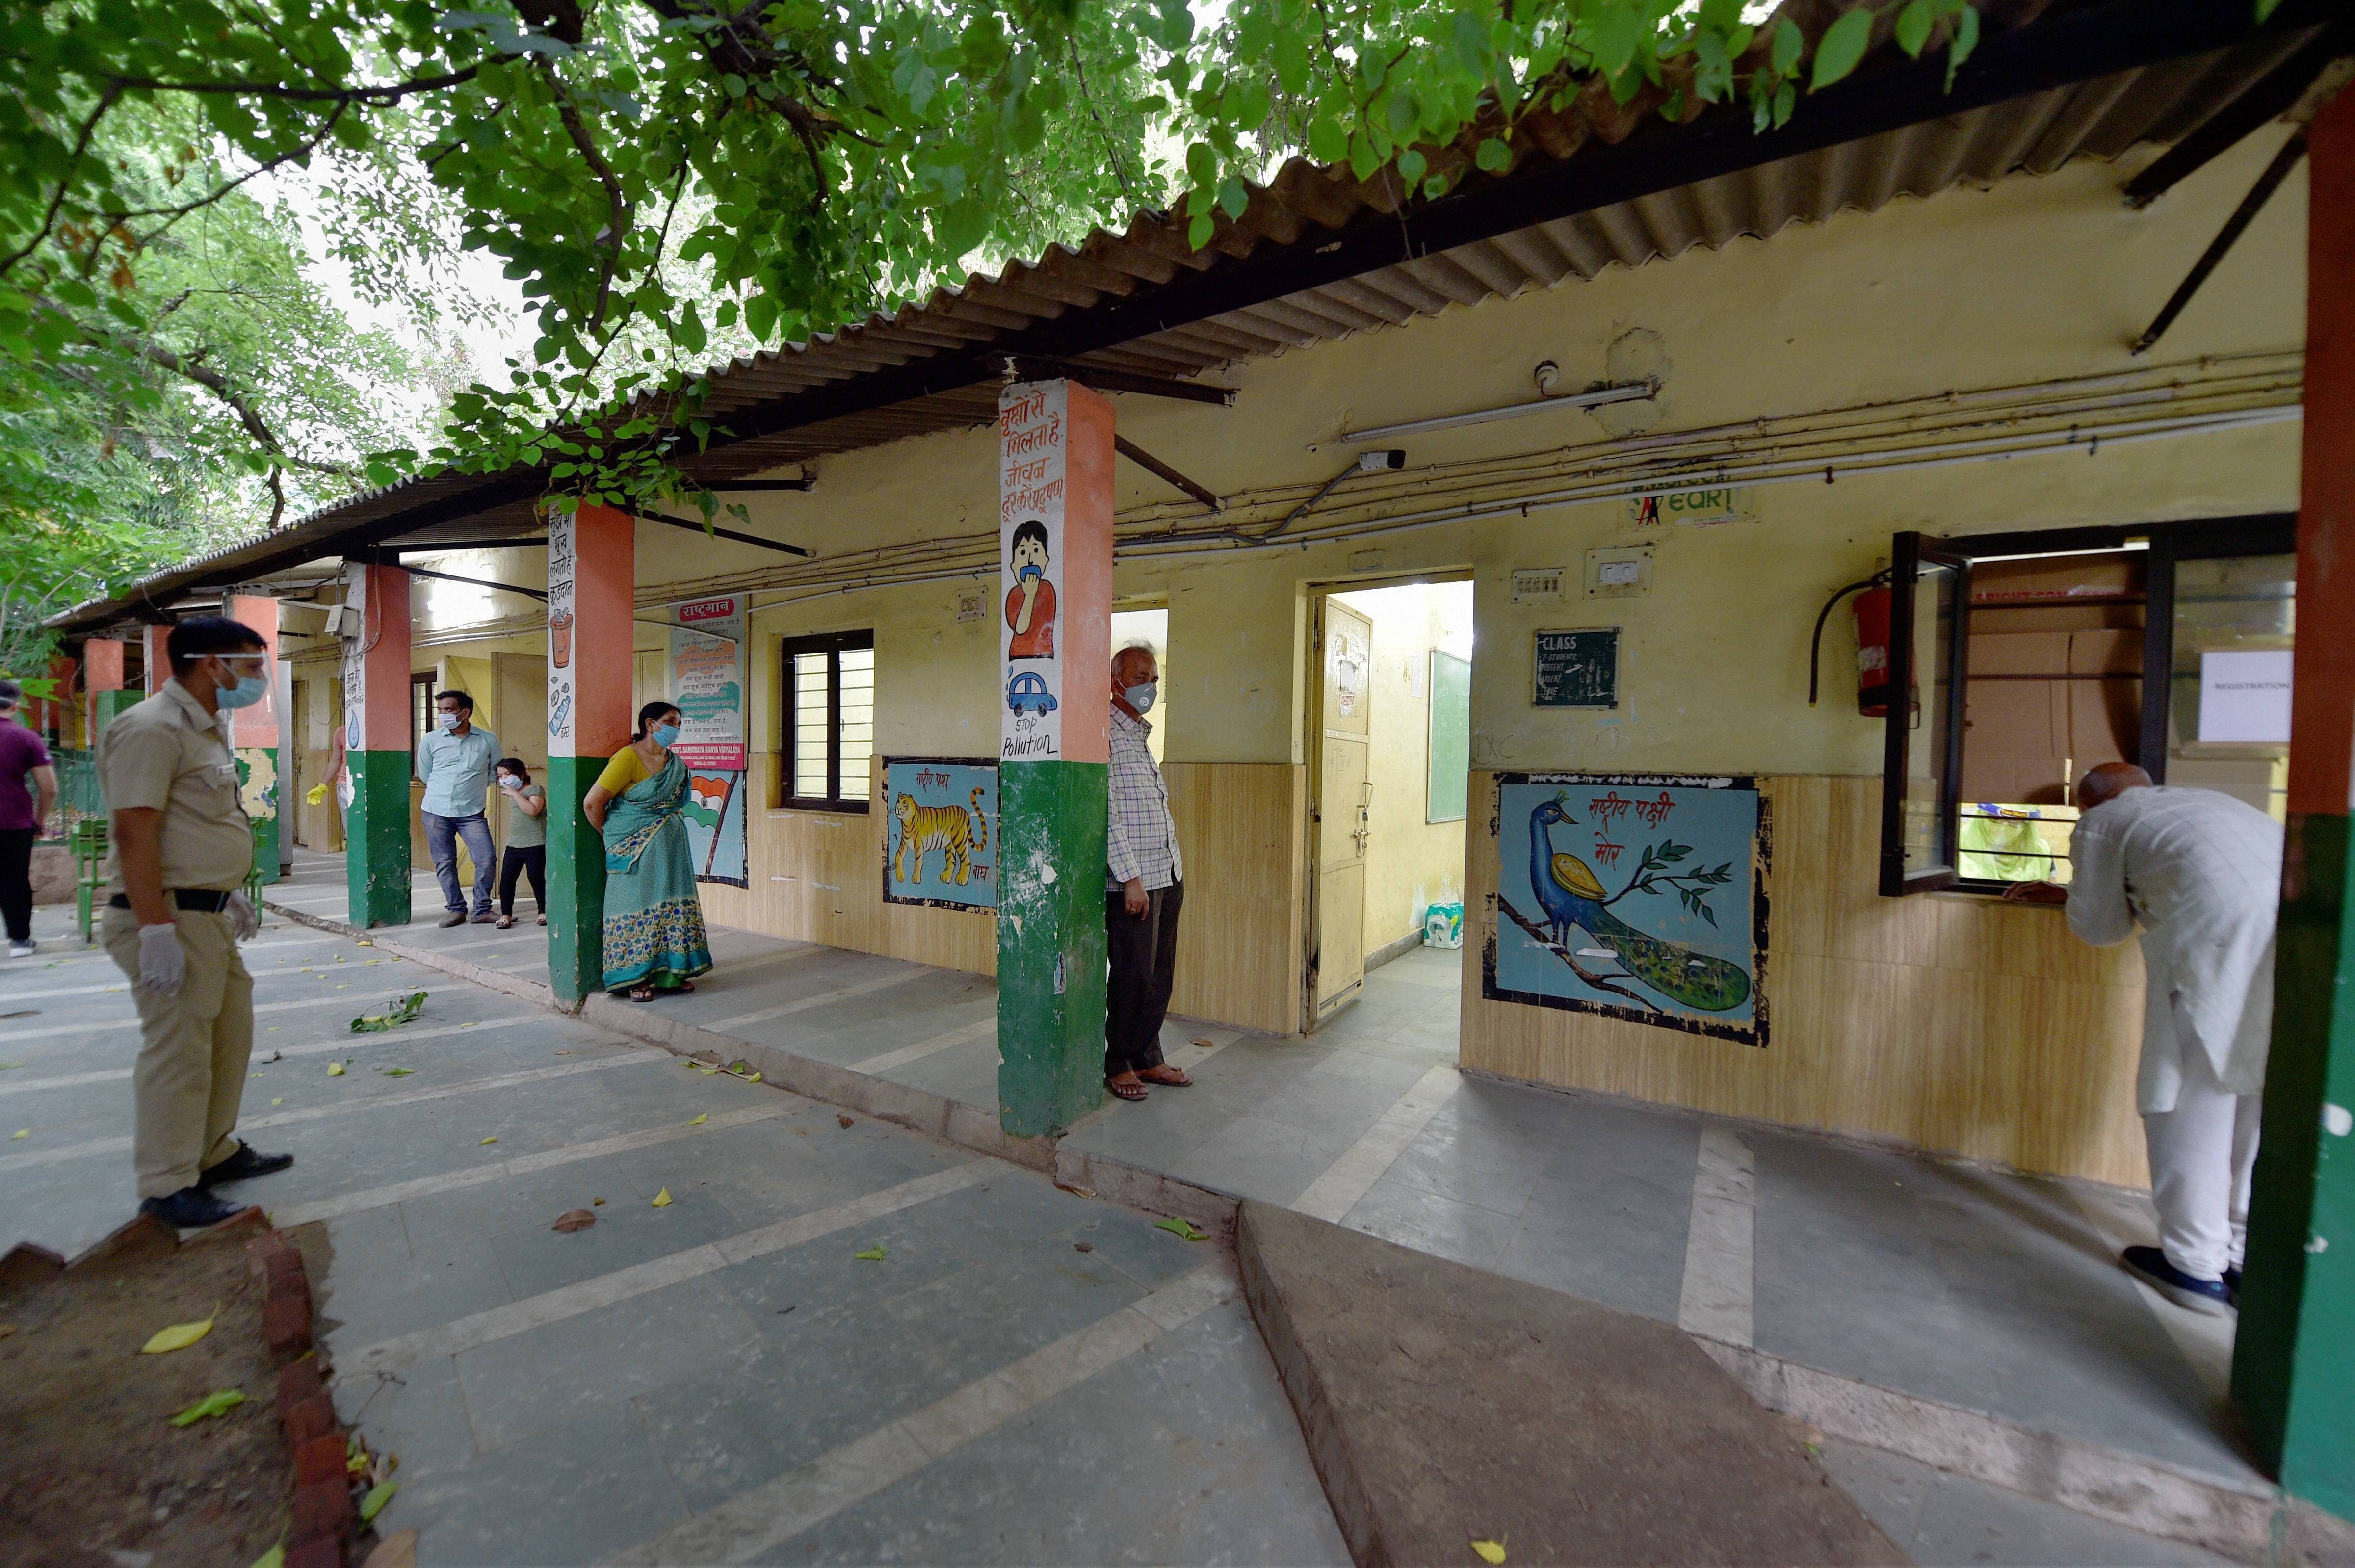 People wait in a queue maintaining physical distance to give samples for COVID 19 tests, at a school at Aruna Asaf Ali Road in New Delhi, Thursday, June 25, 2020. (PTI Photo)